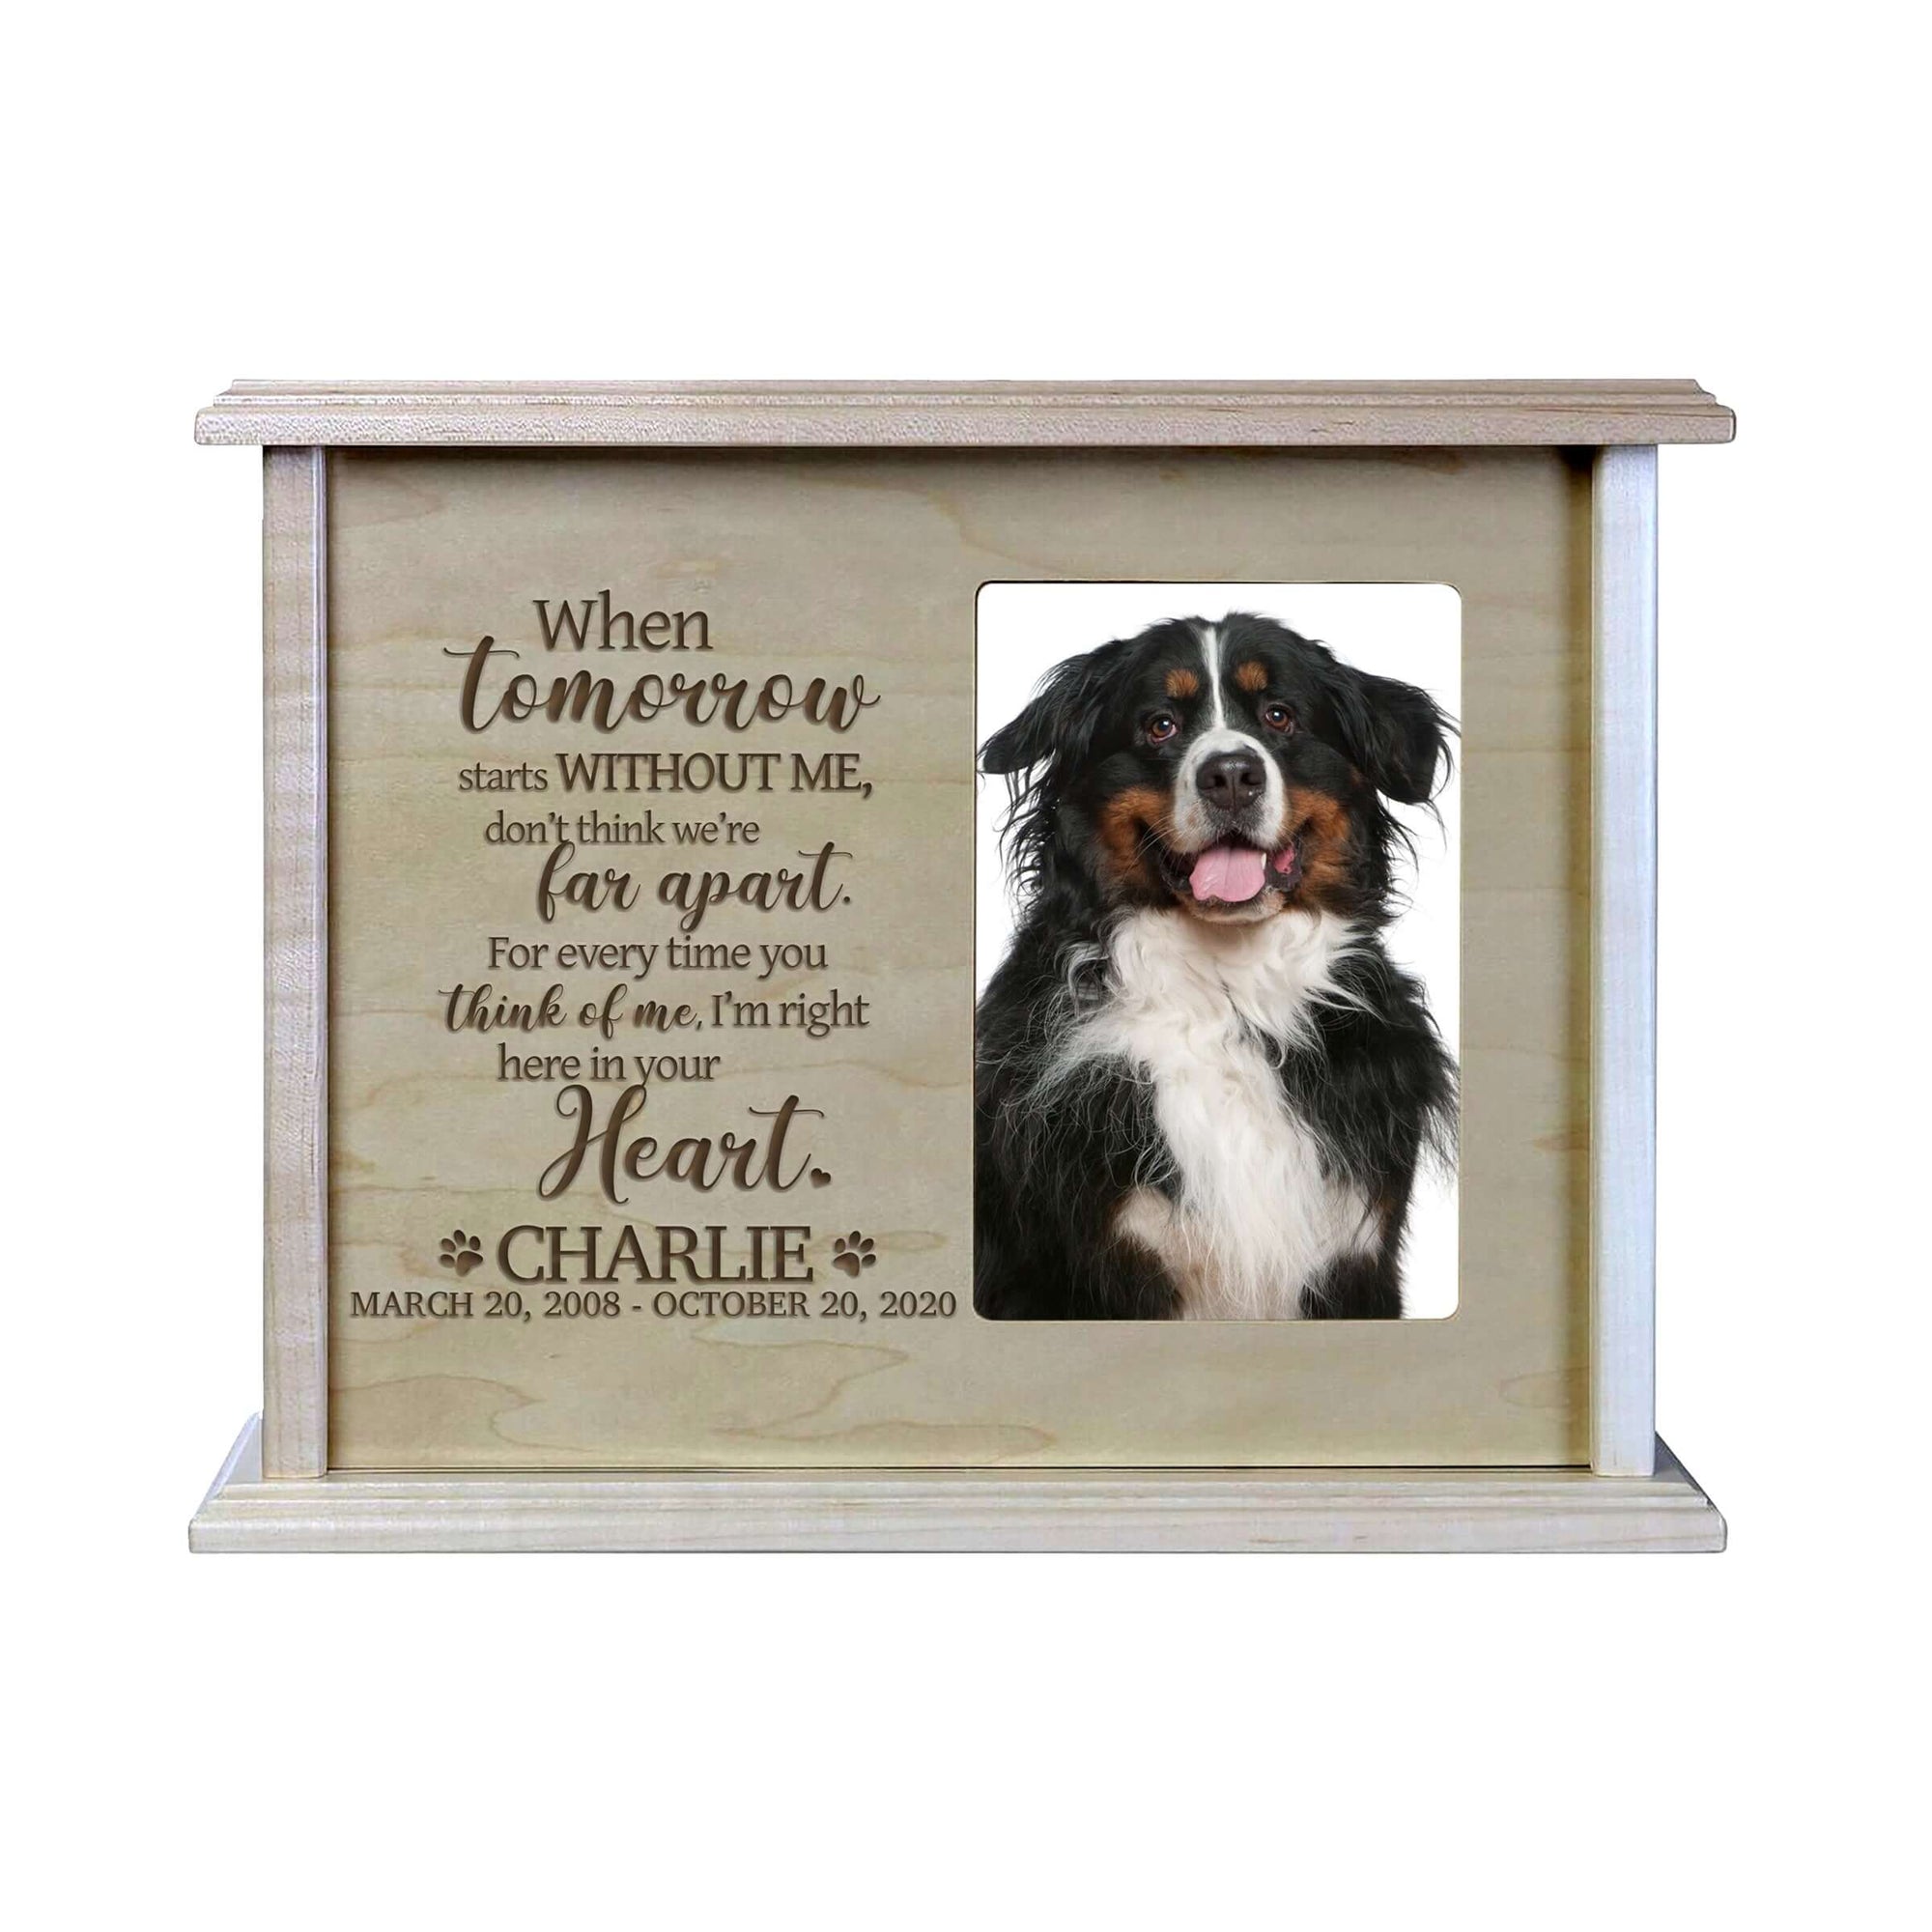 Pet Memorial Picture Cremation Urn Box for Dog or Cat - When Tomorrow Starts Without Me